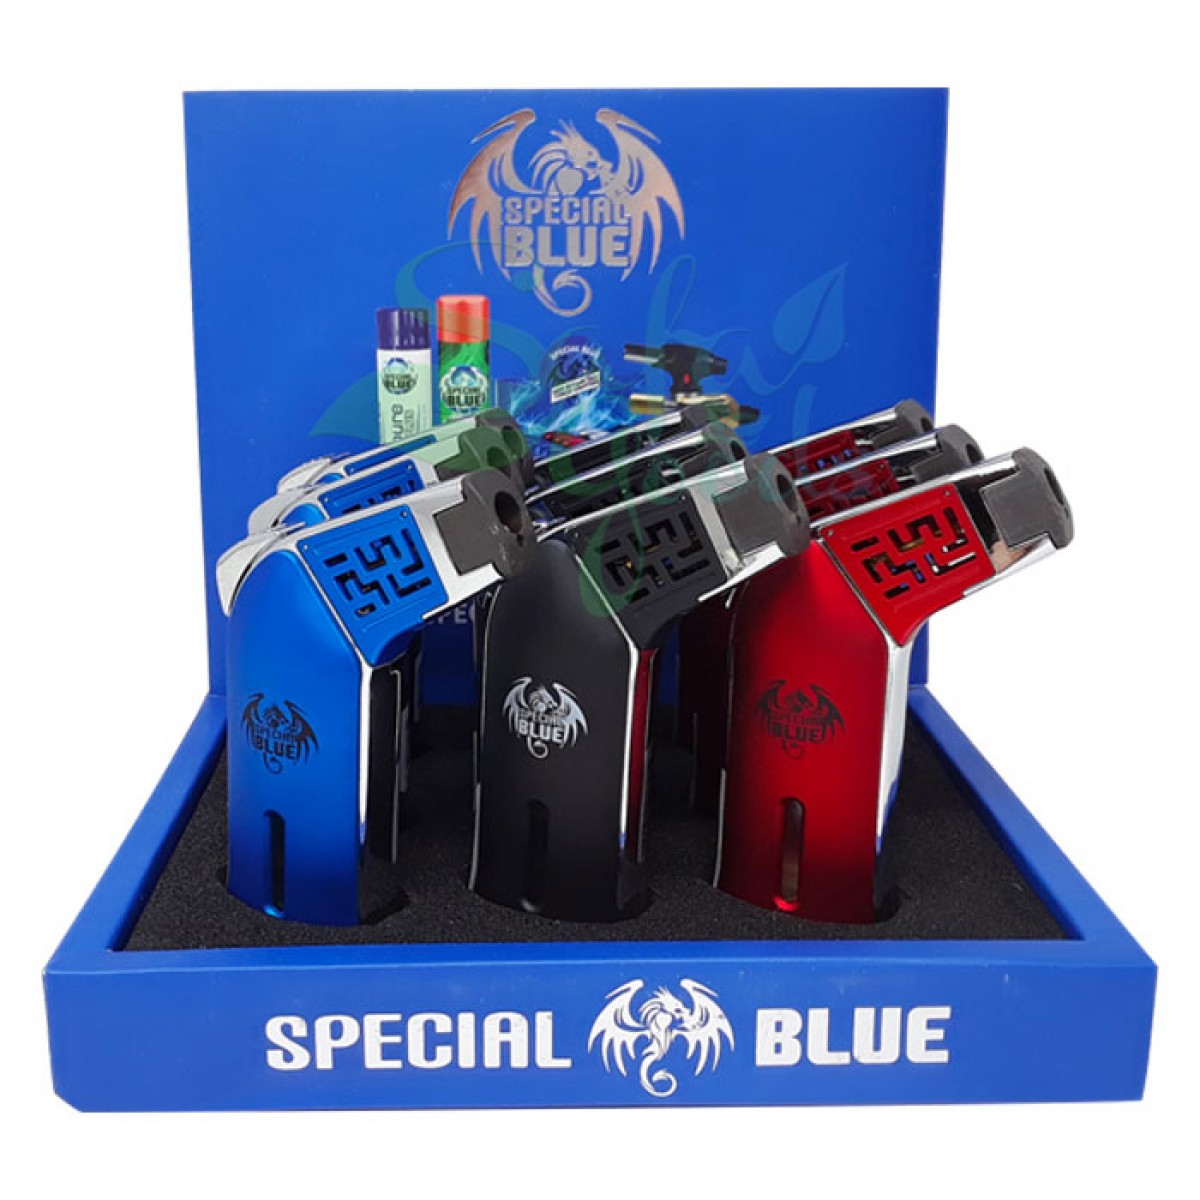 Special Blue - Blue Steel Torch Lighters - 9PC Display